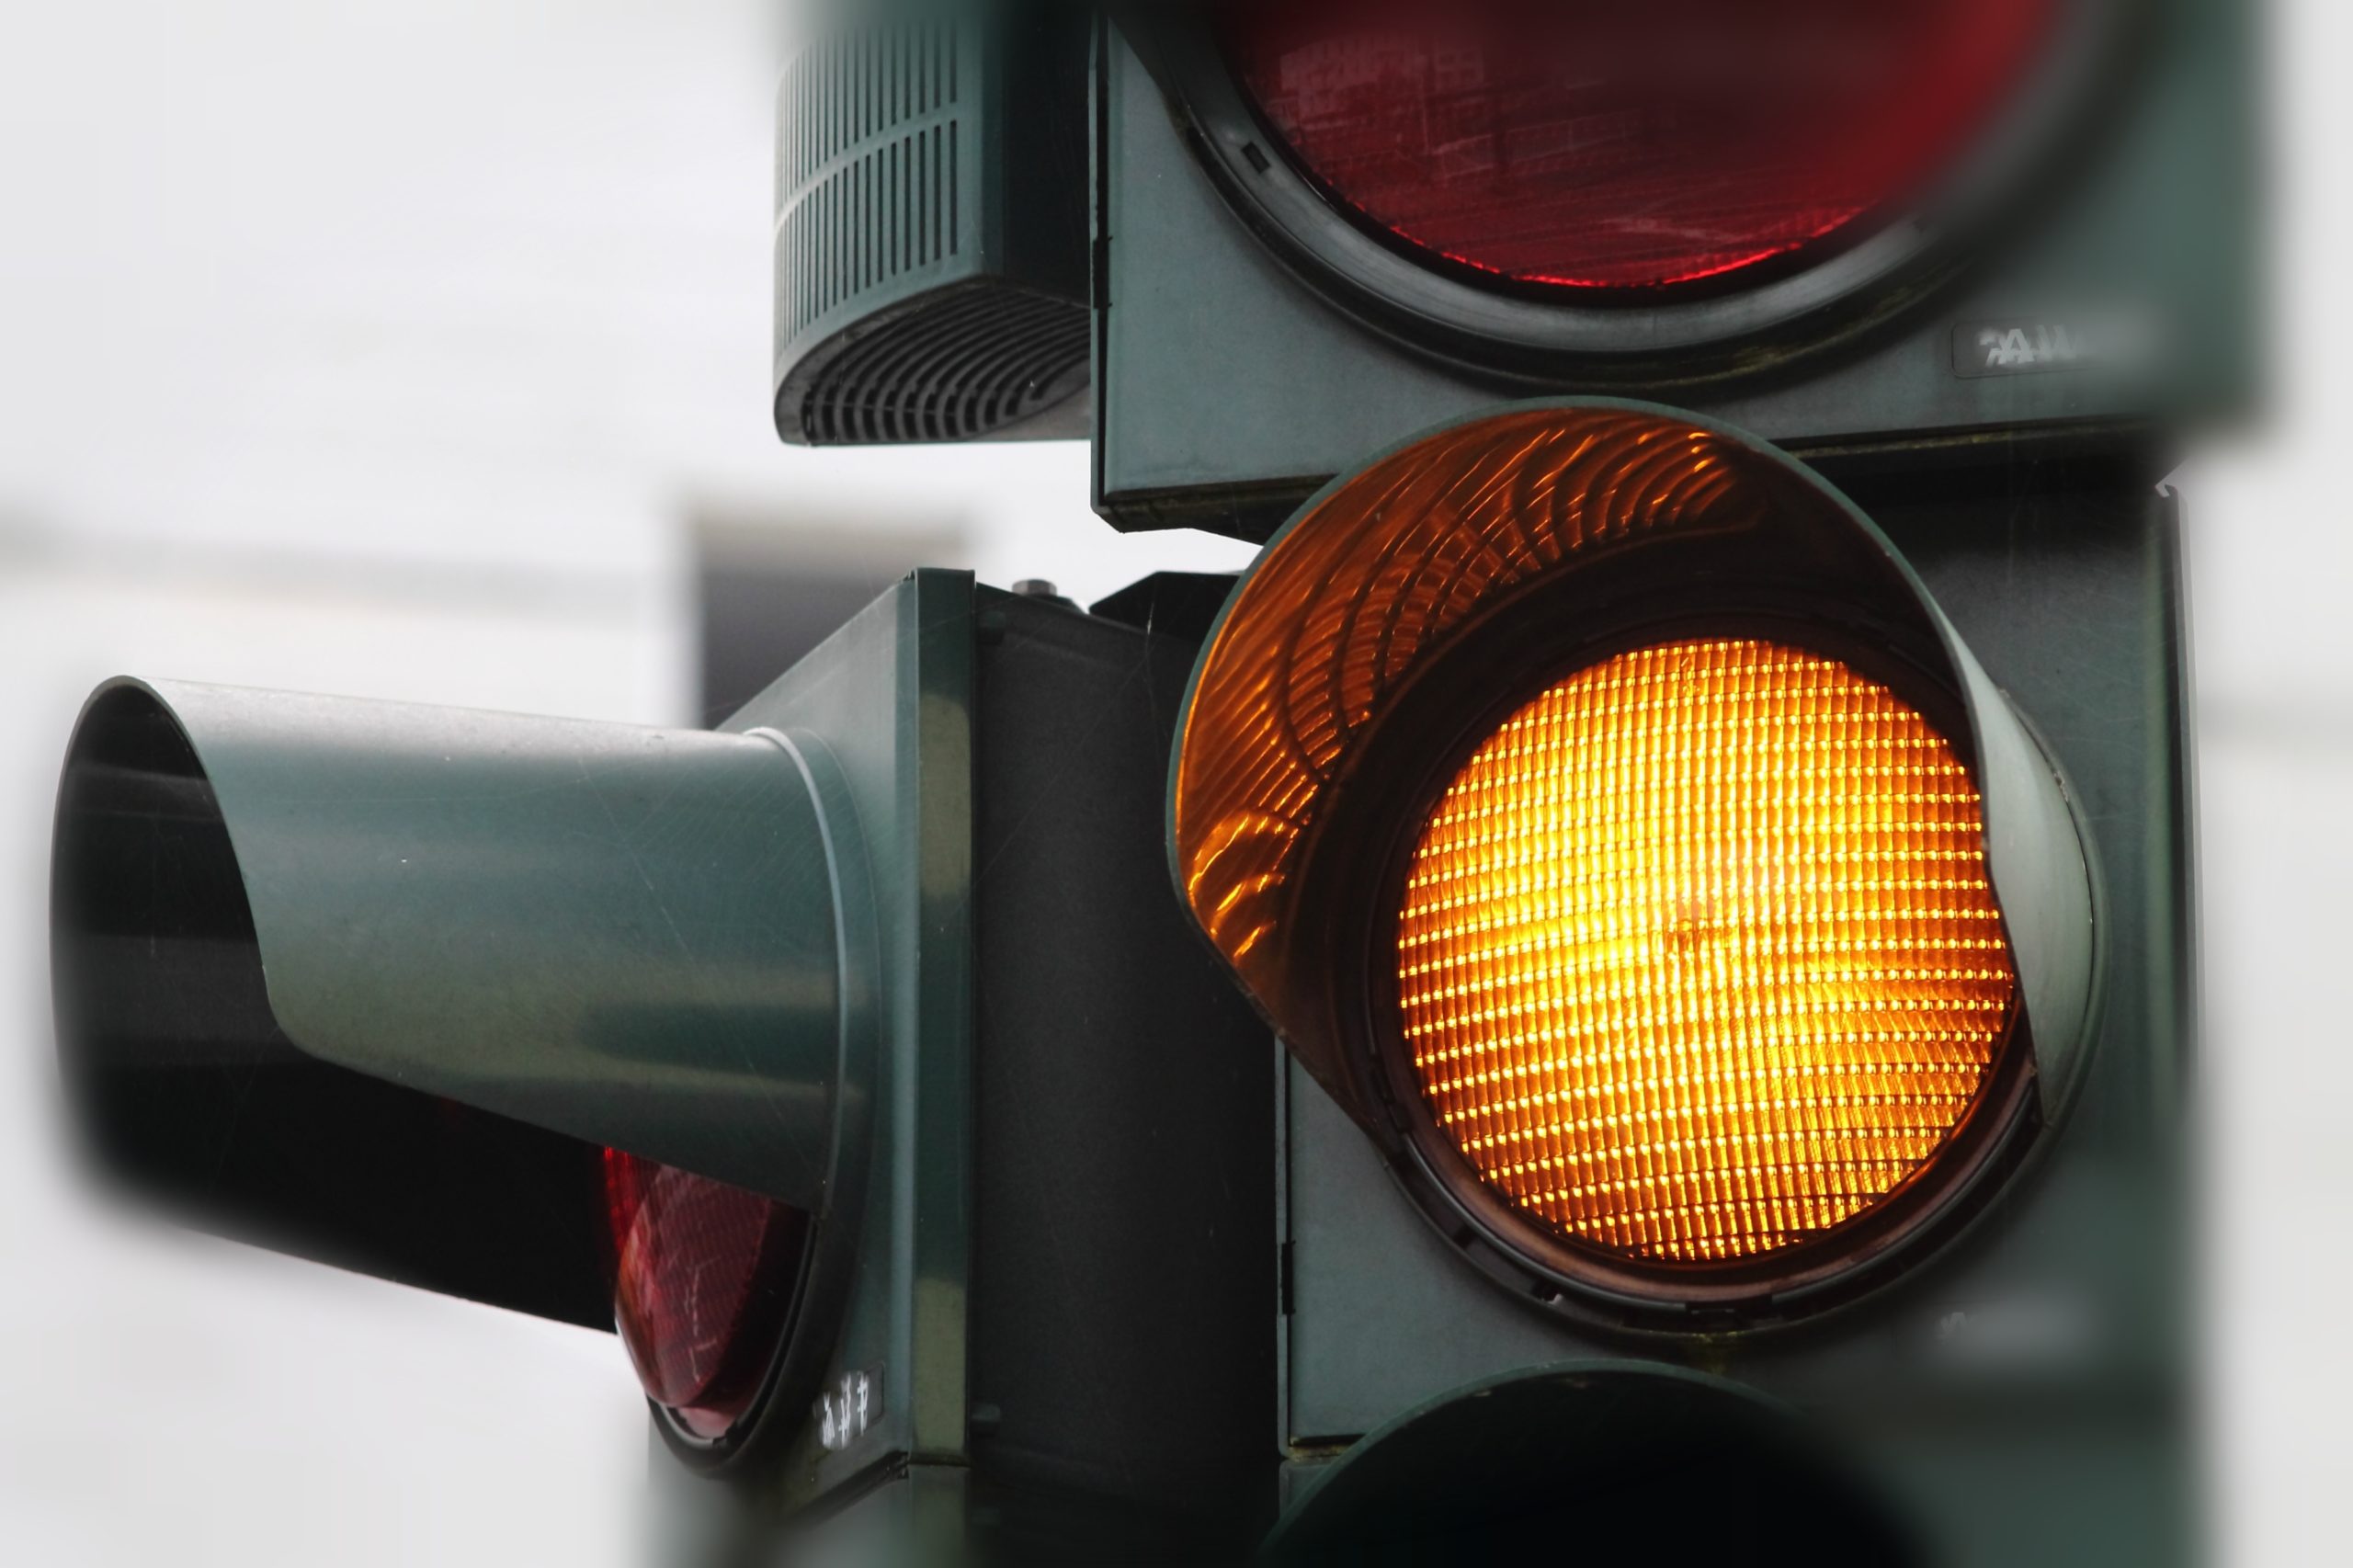 When does running the yellow light become illegal?